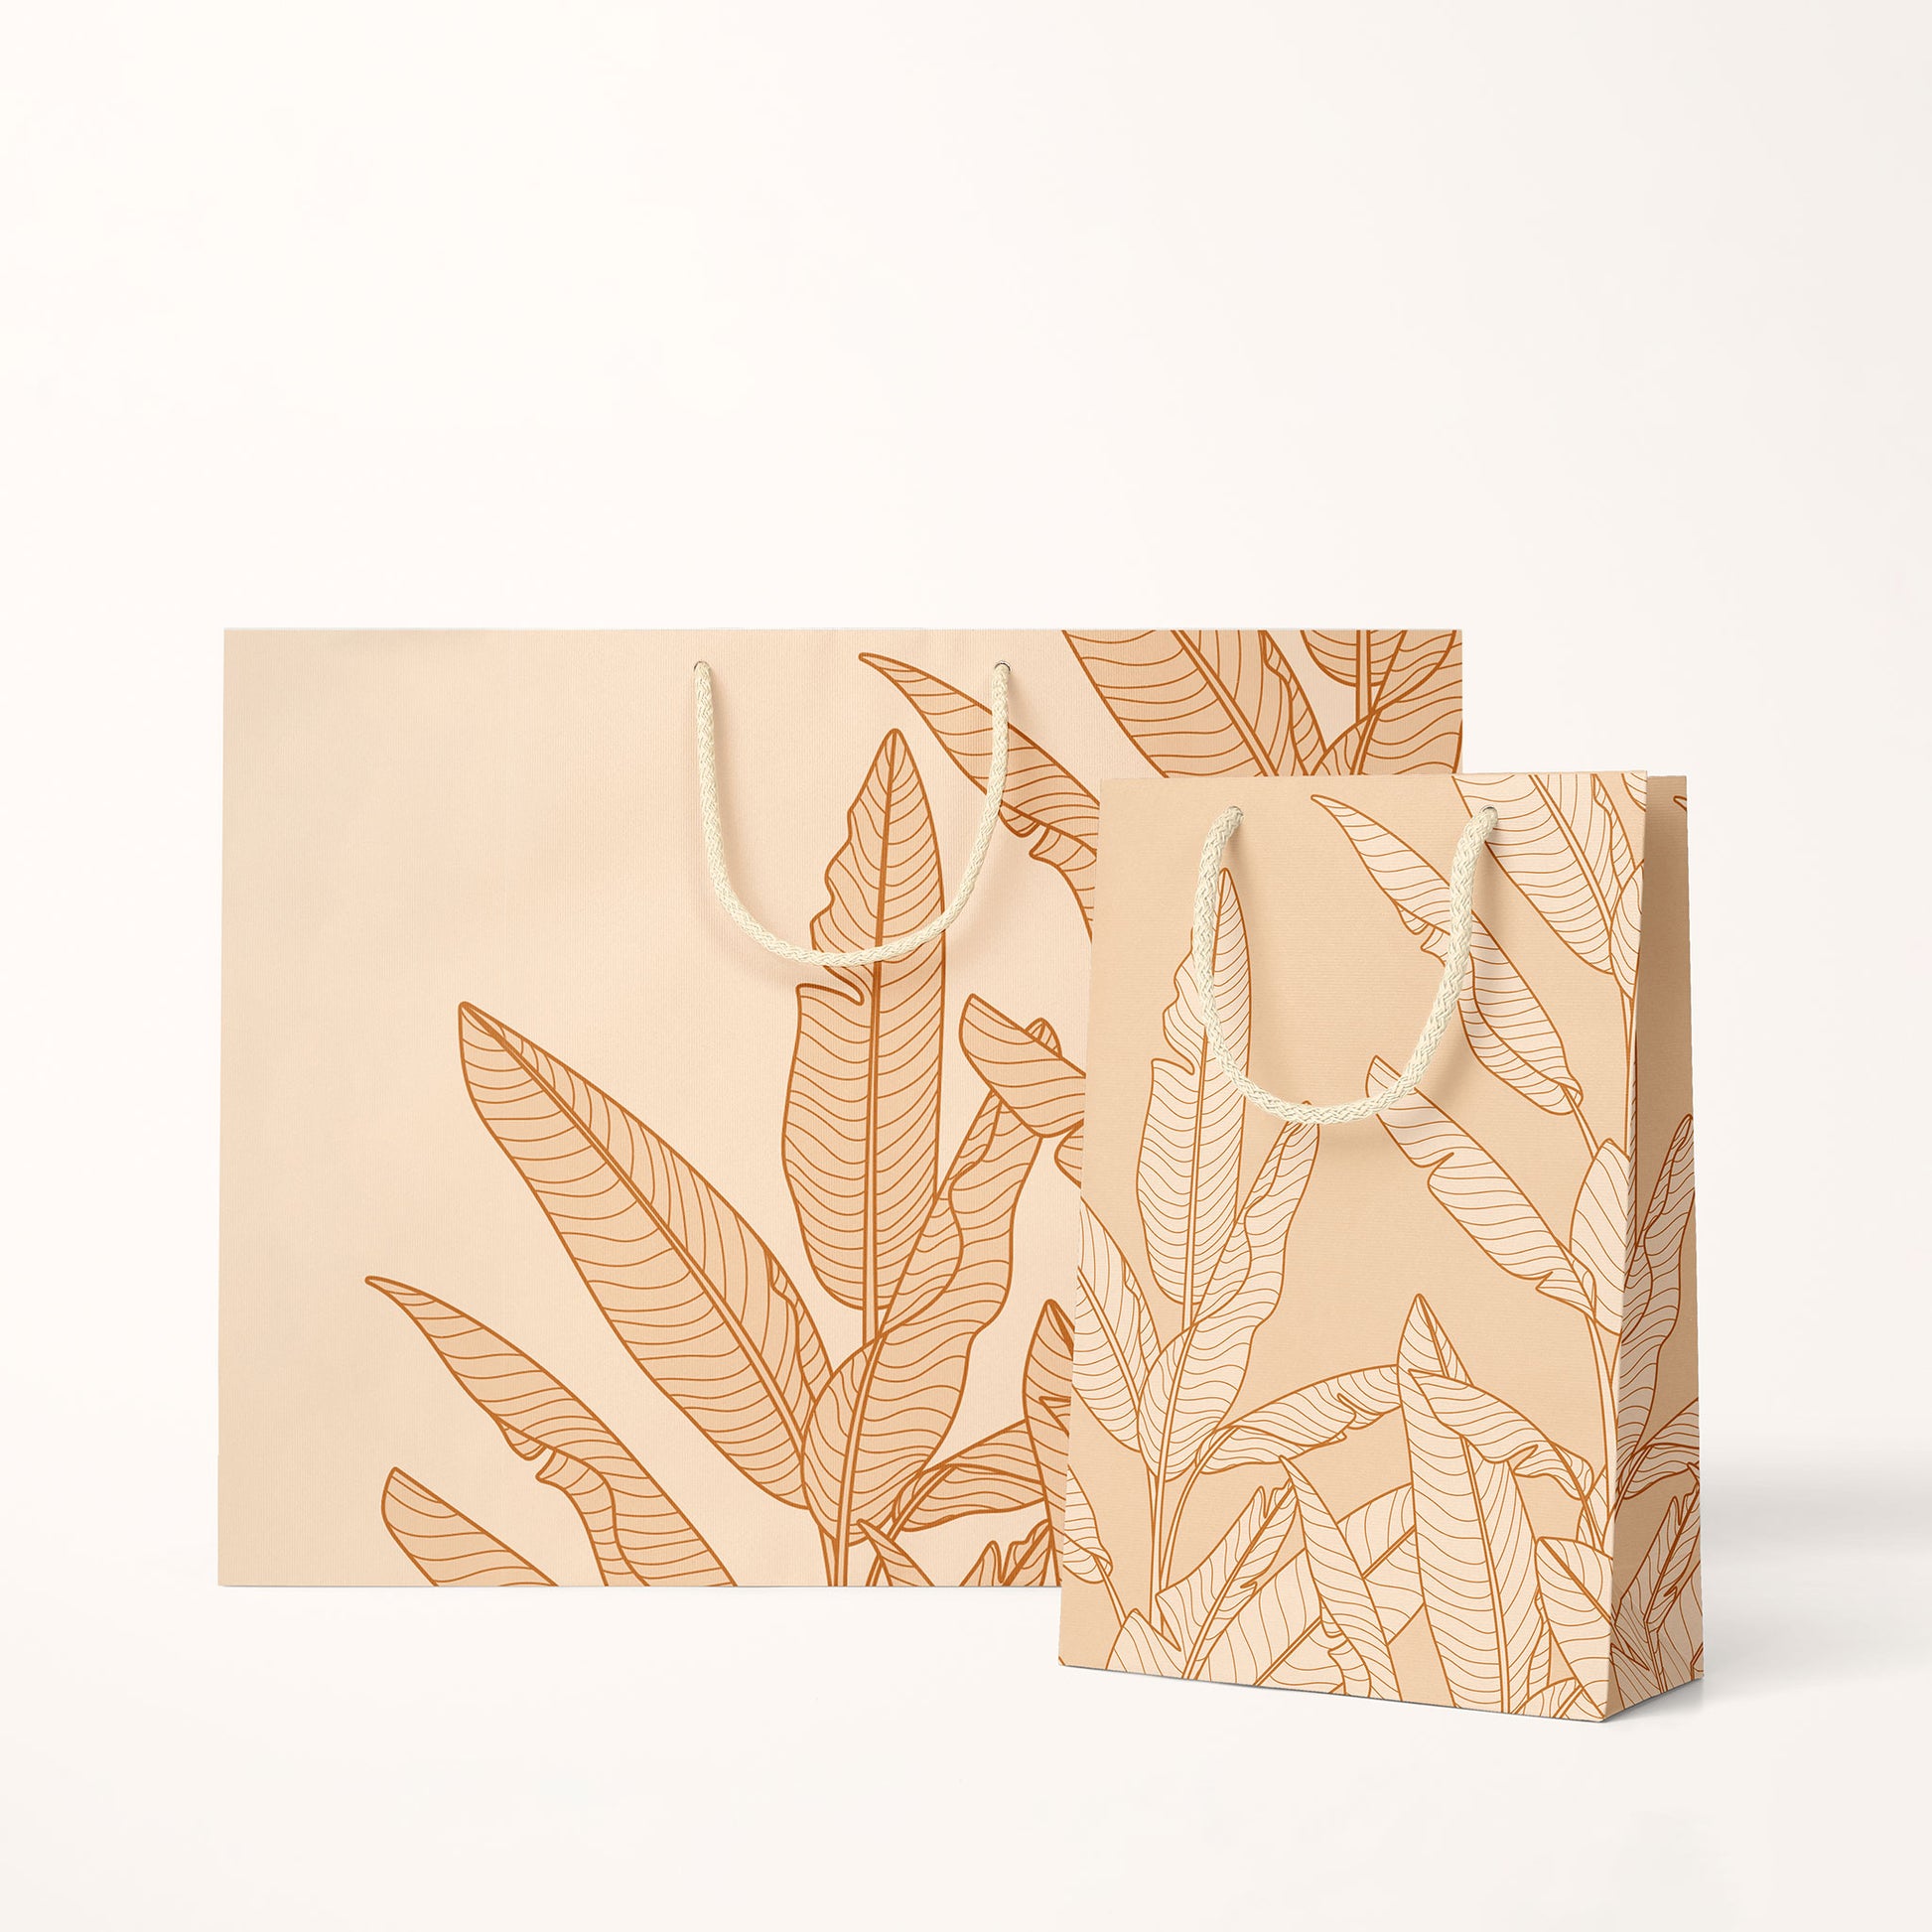 Two sizes of paper gift bags with a cream cotton handles and super light shade of salmon pink with graphics of banana leaves.